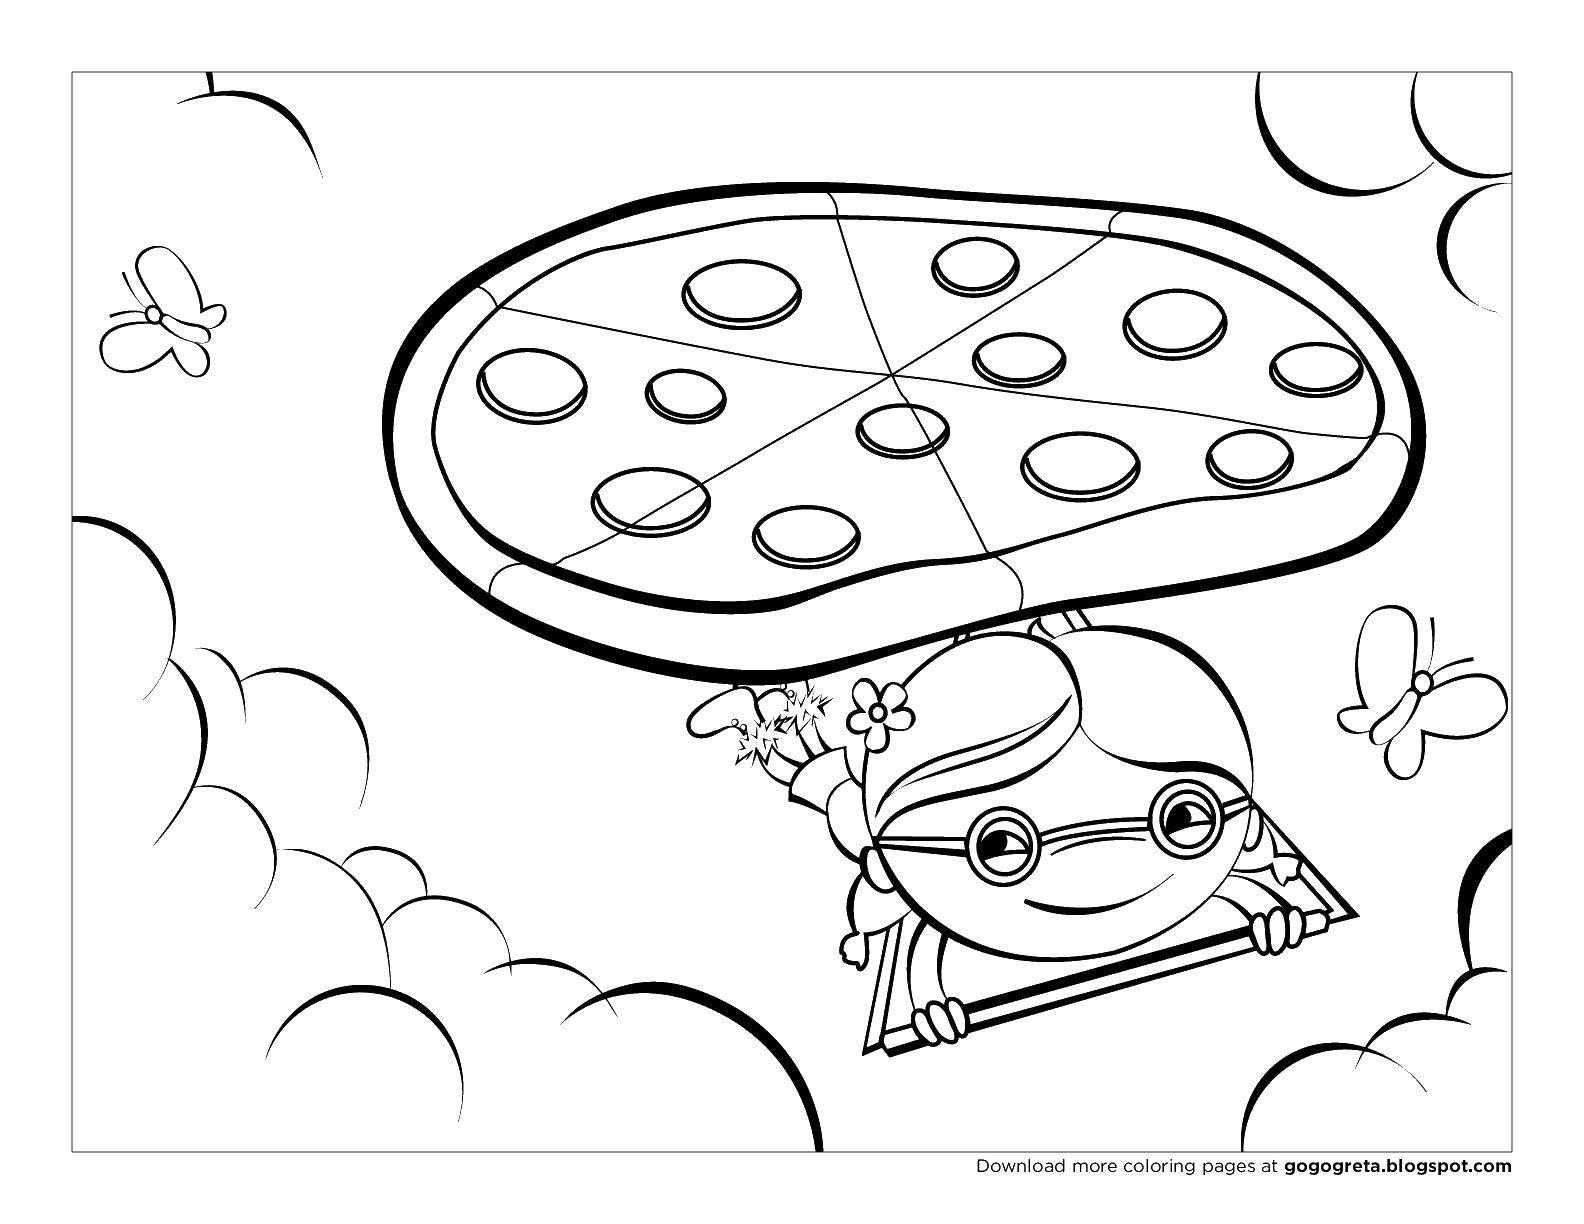 Coloring Girl with pizza. Category The food. Tags:  pizza, food.